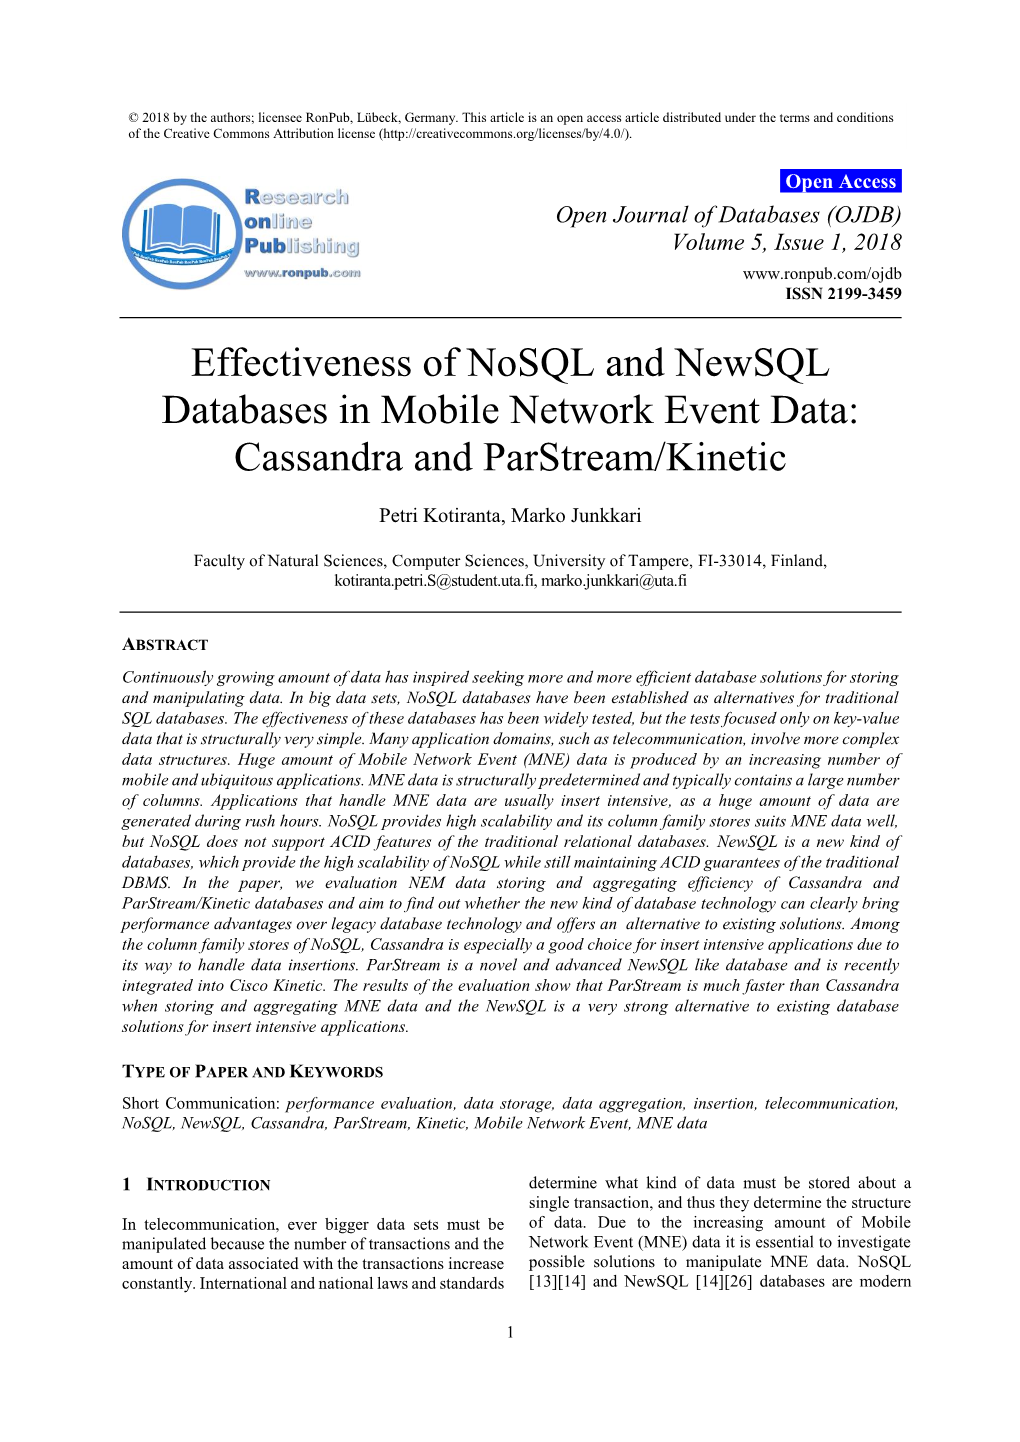 Effectiveness of Nosql and Newsql Databases in Mobile Network Event Data: Cassandra and Parstream/Kinetic